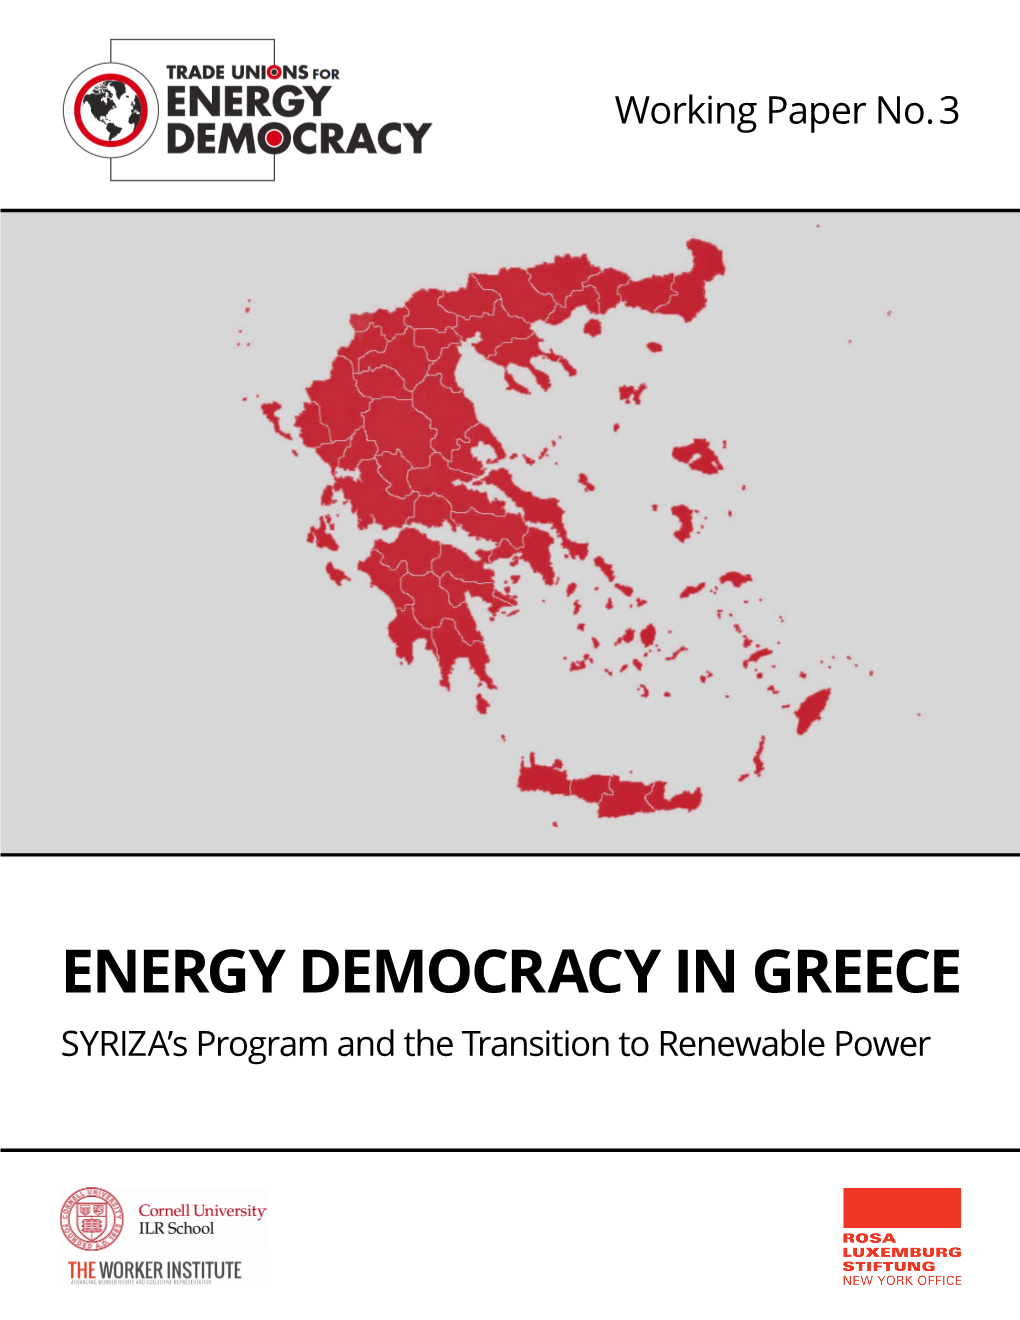 Energy Democracy in Greece: Syriza's Program and the Transition to Renewable Power